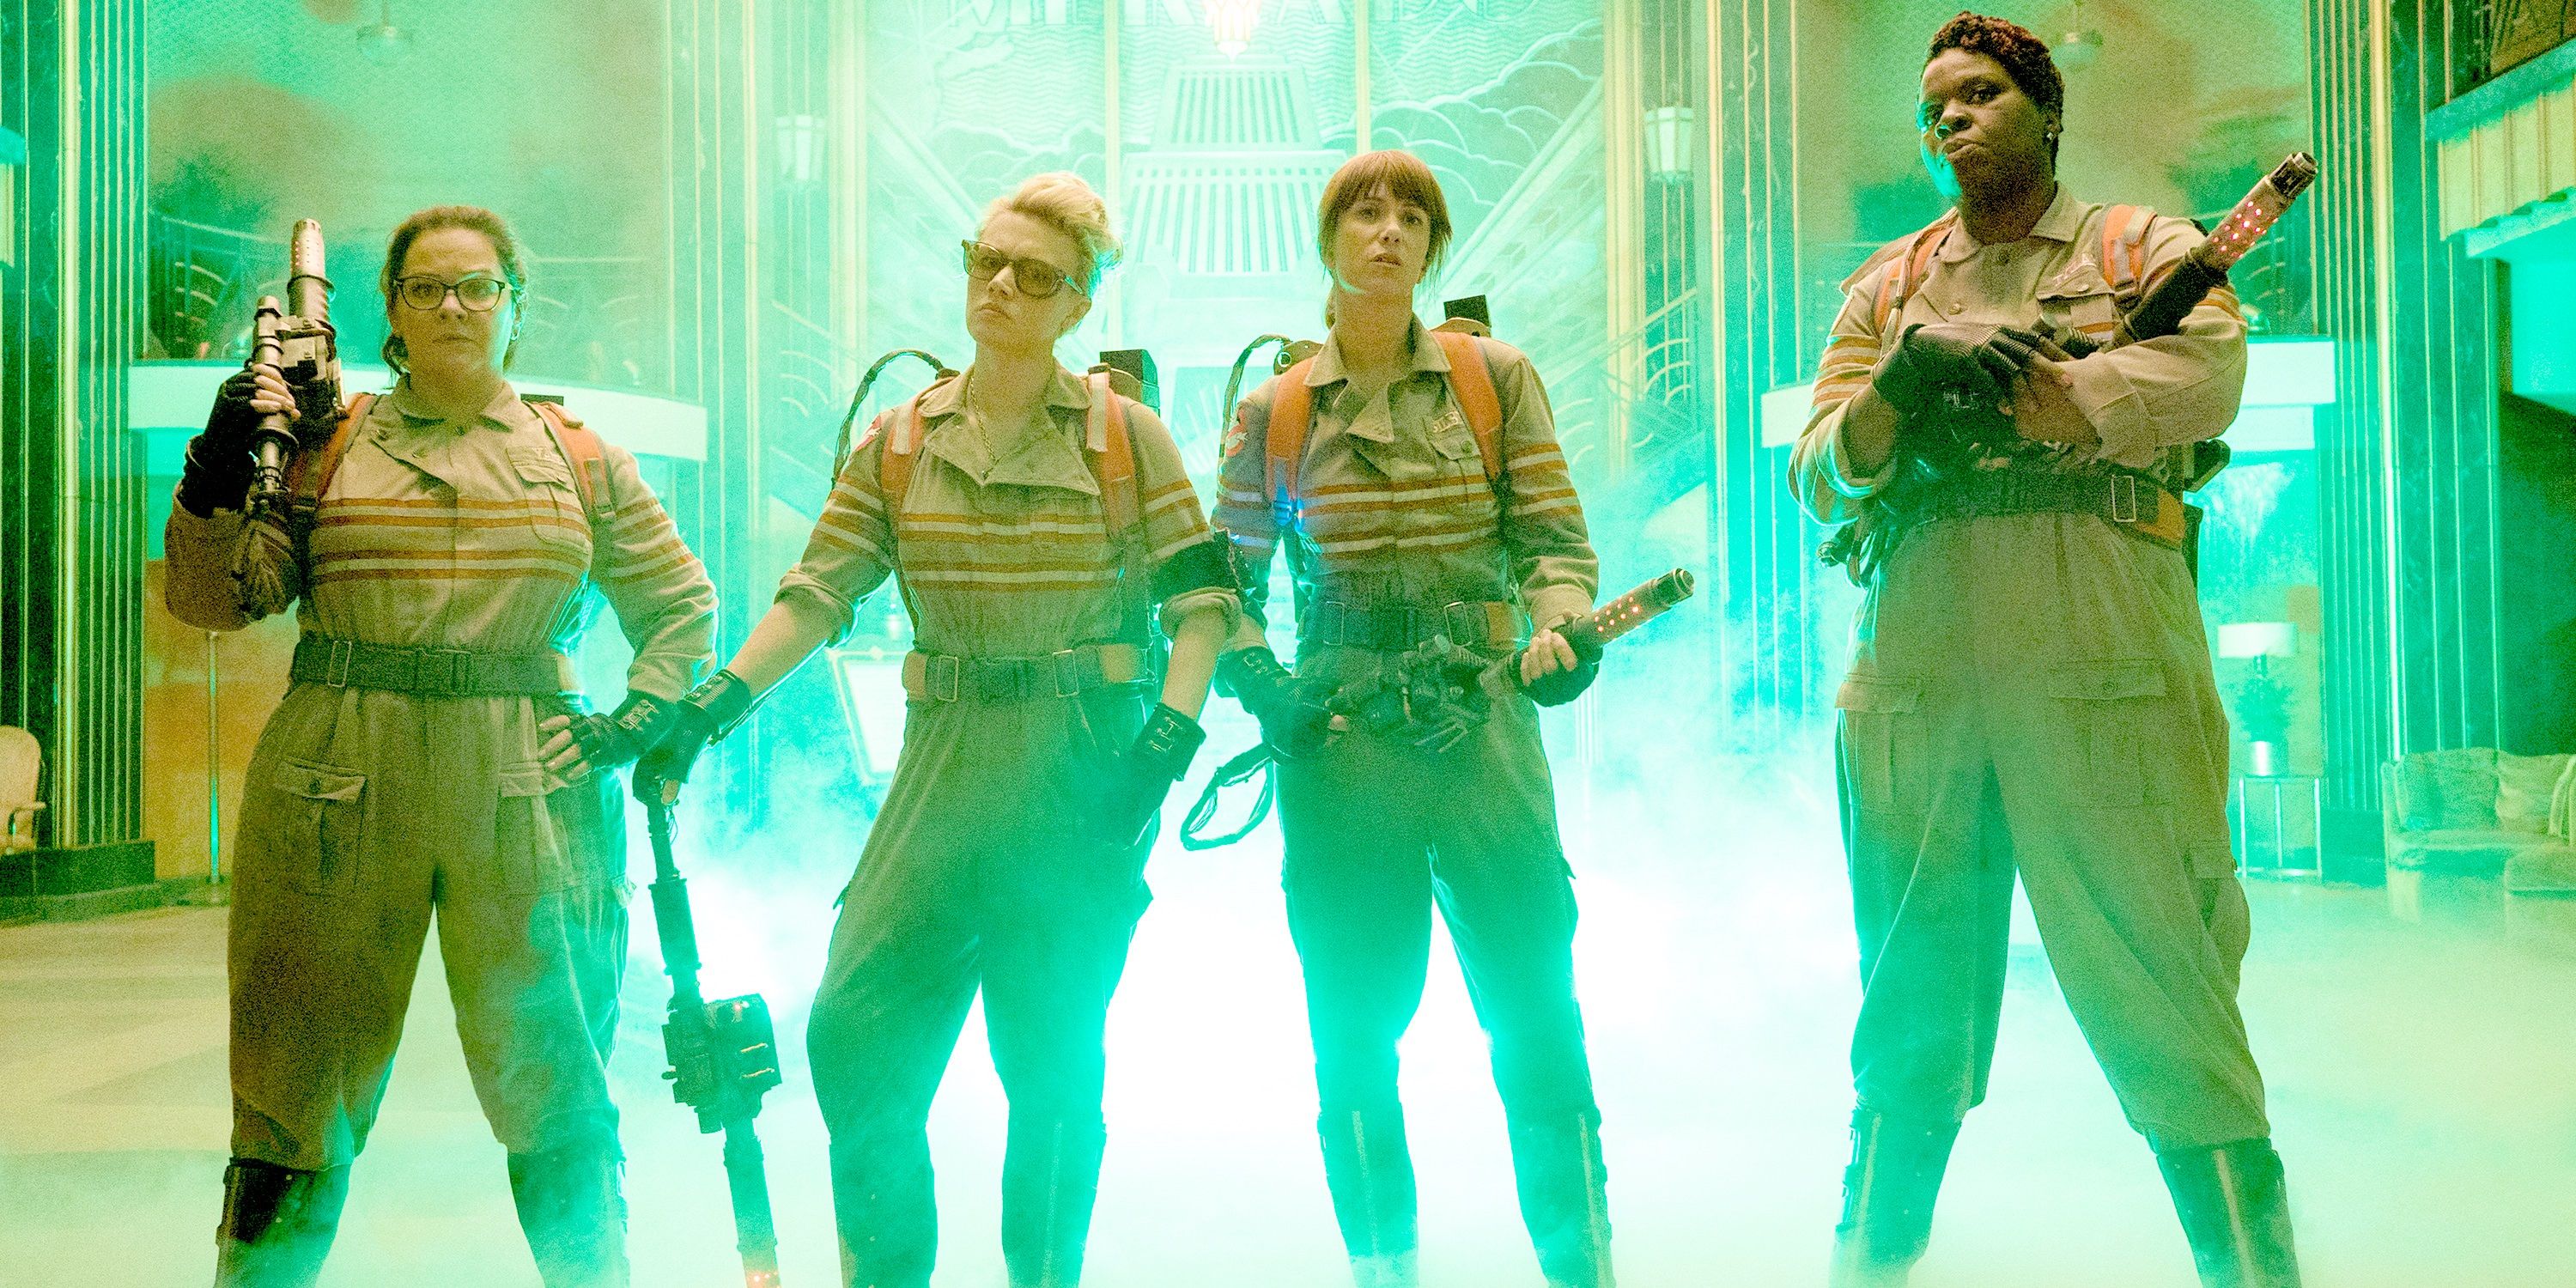 The cast of the 2016 Ghostbusters reboot surrounded by green smoke